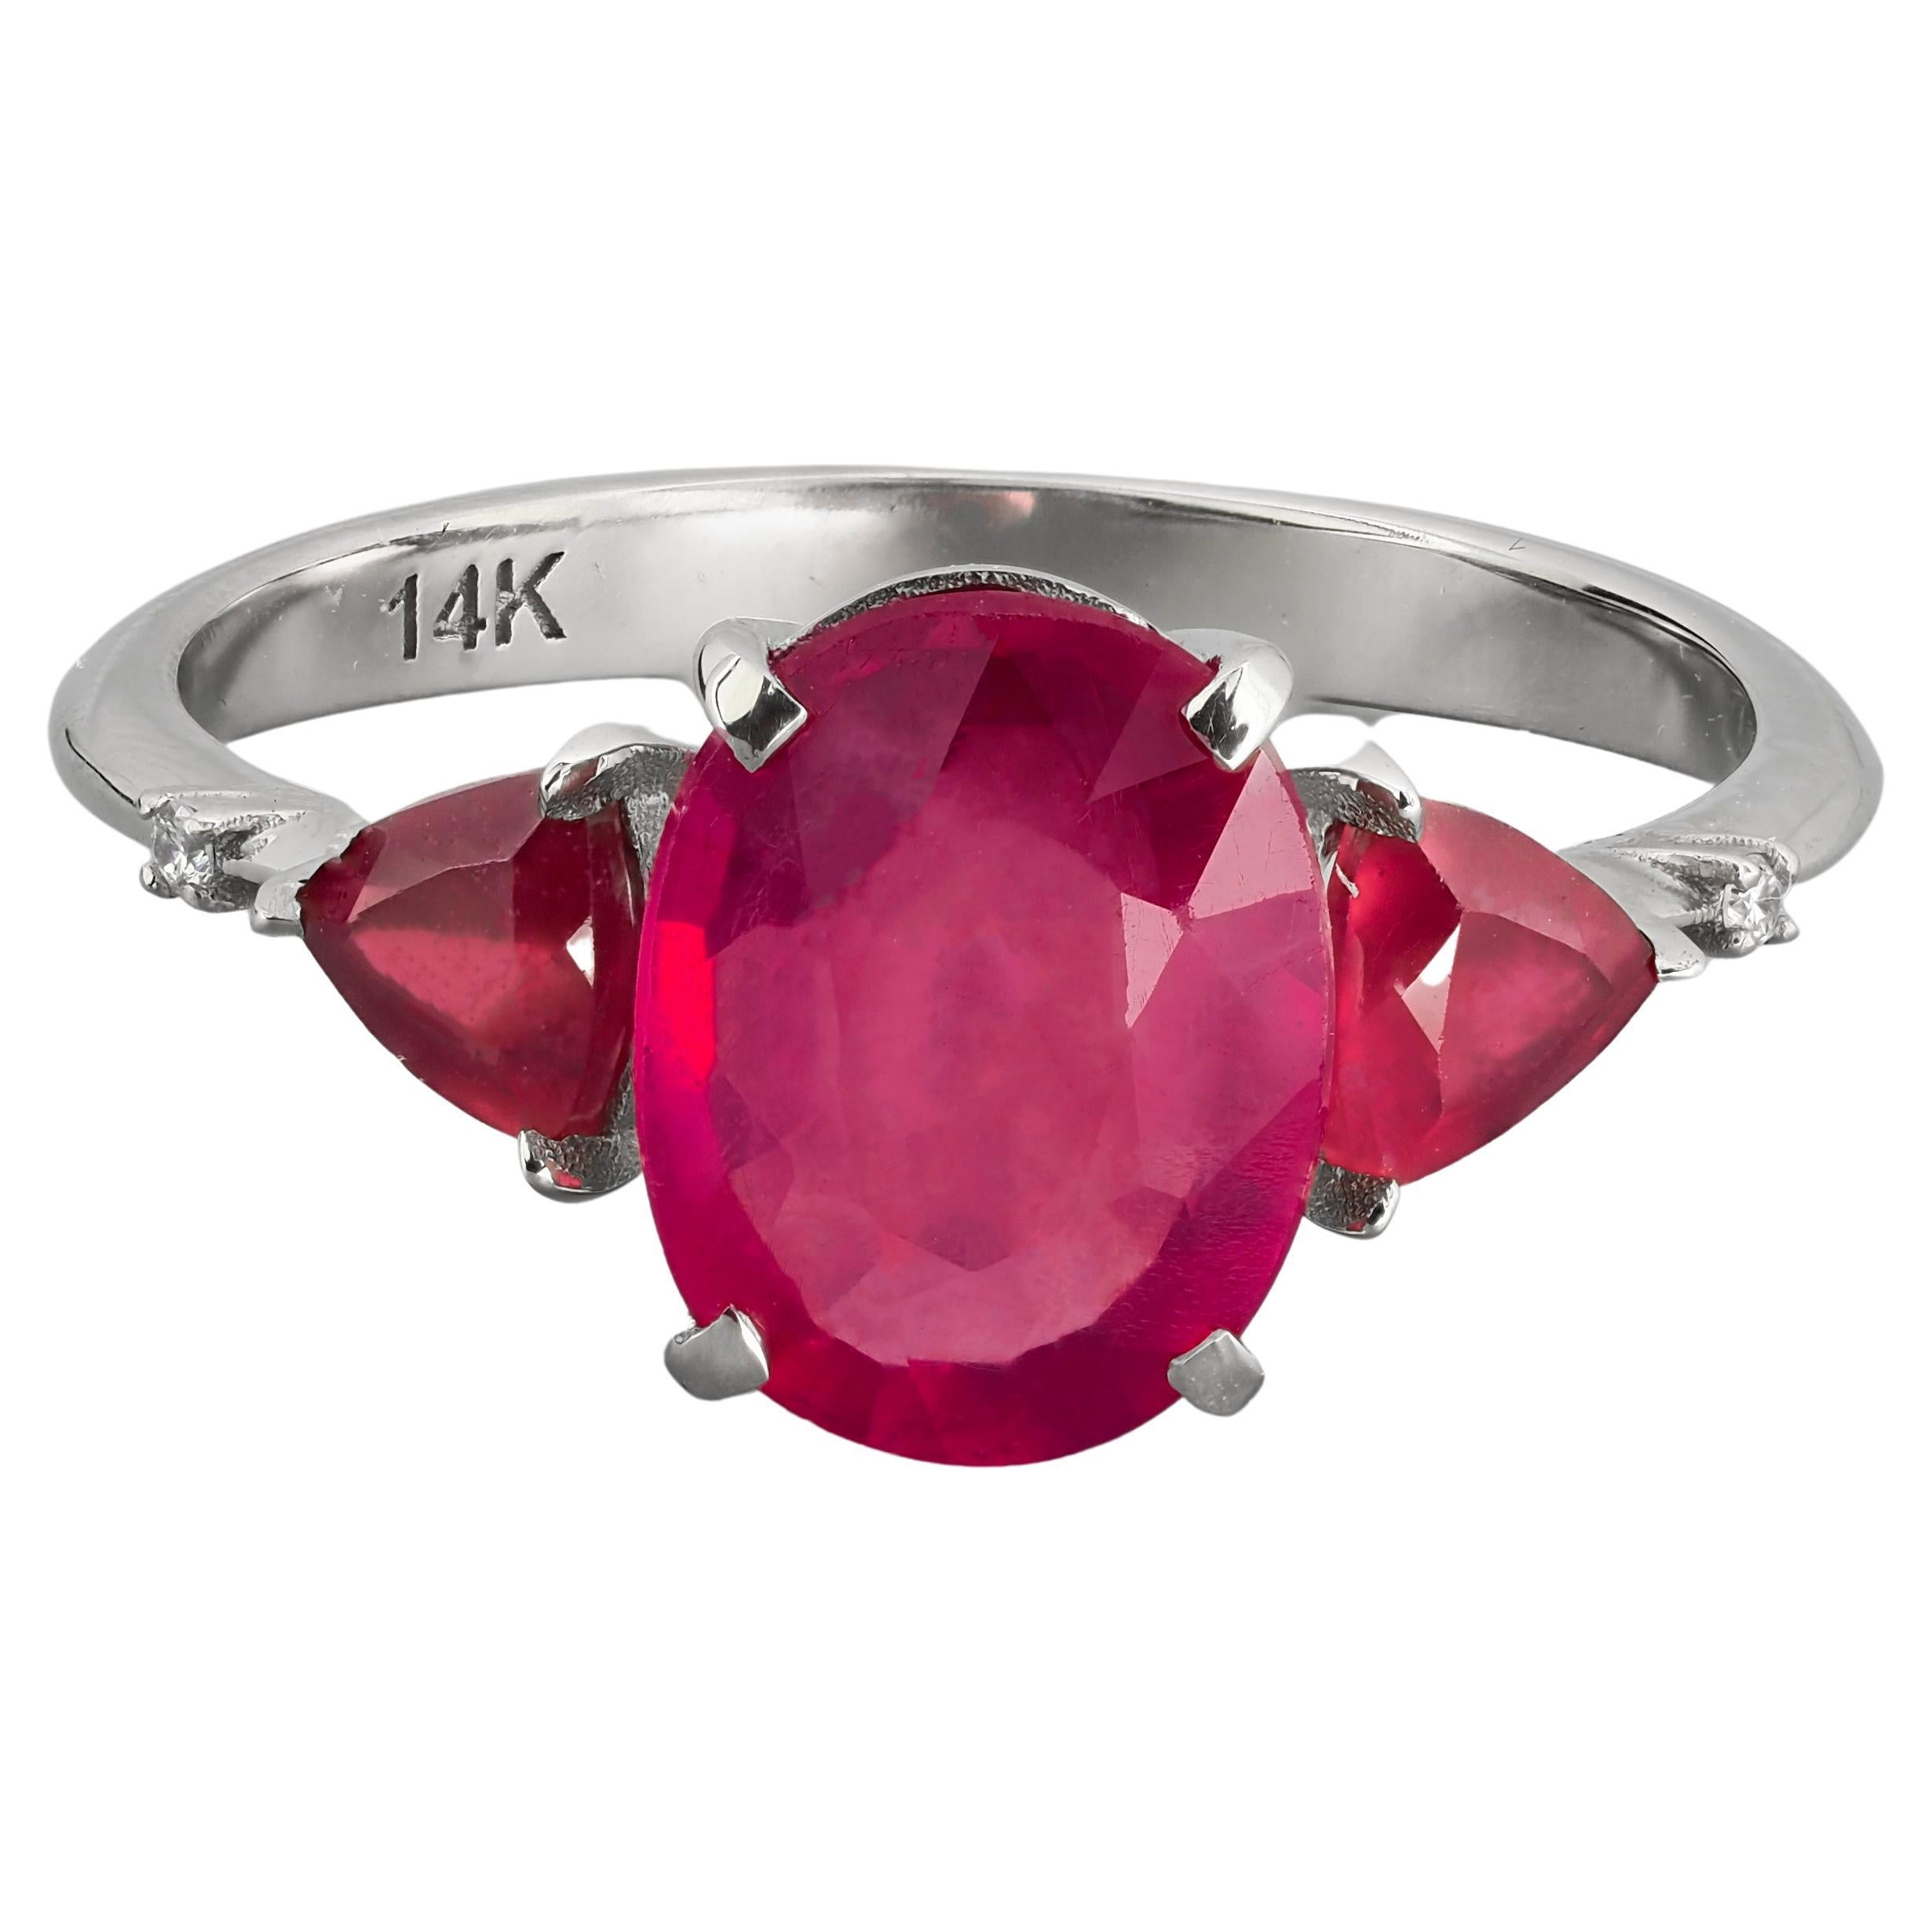 For Sale:  14 karat Gold Ring with Ruby and Diamonds